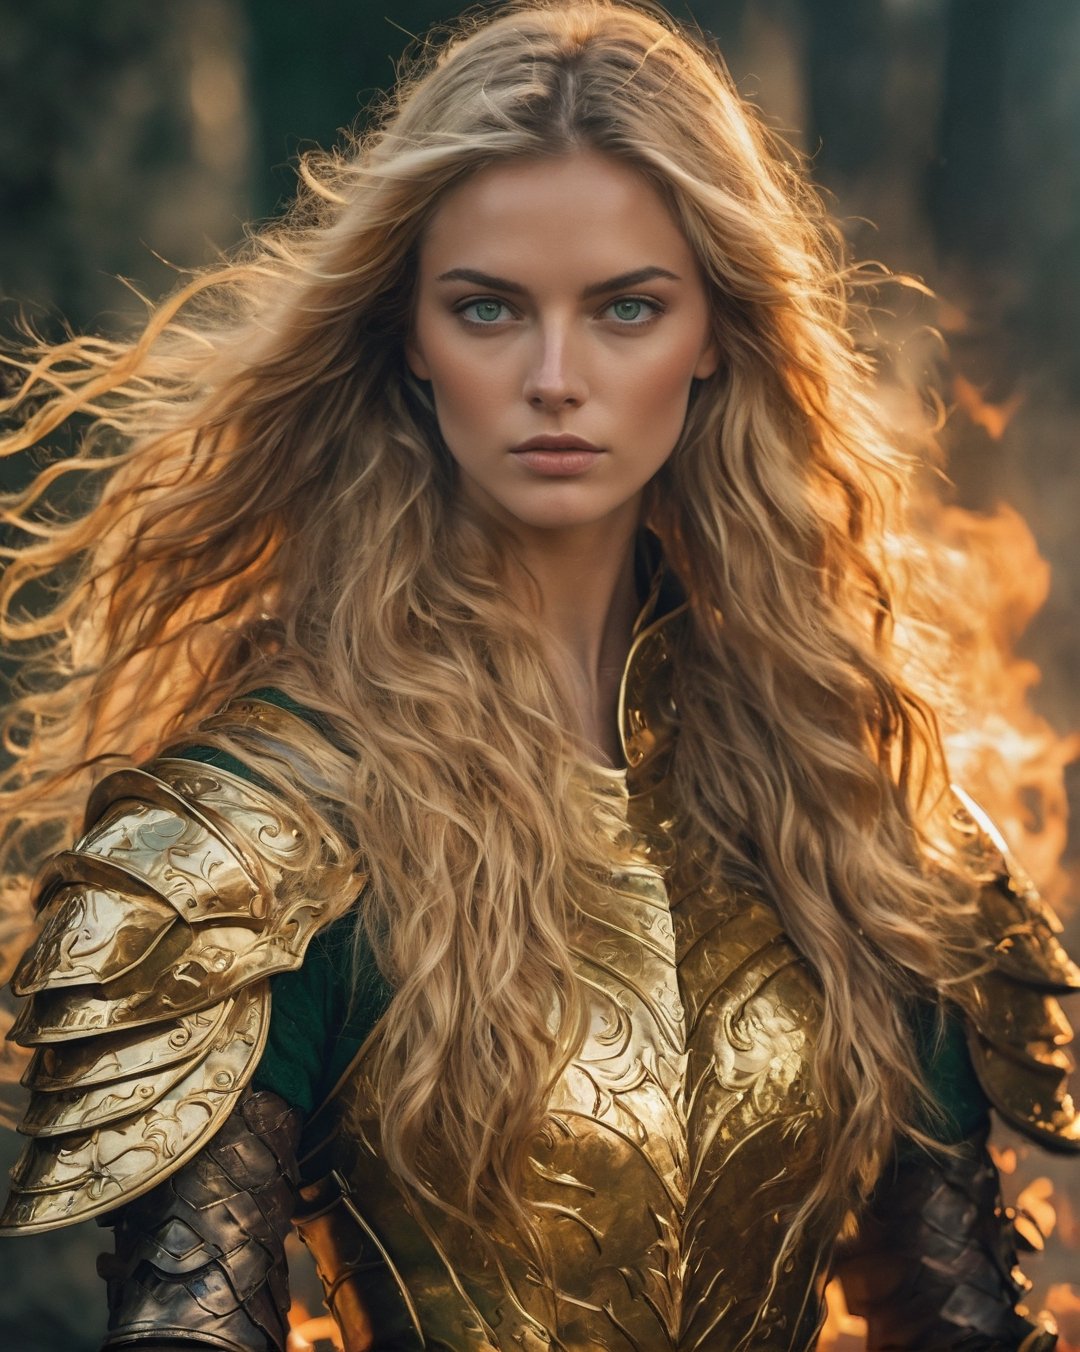 a beautiful blonde warrior woman (( beautiful))) in golden armor, warrior,((((long wavy  beautiful hair)))), (((golden green Color eyes))))), beautiful face(((((fire power lit in her one hand))))), strong build body grainy cinematic,  godlyphoto r3al,detailmaster2,aesthetic portrait, cinematic colors, earthy , moody,  , dark background, cinematic beautiful scene, beautiful girl 